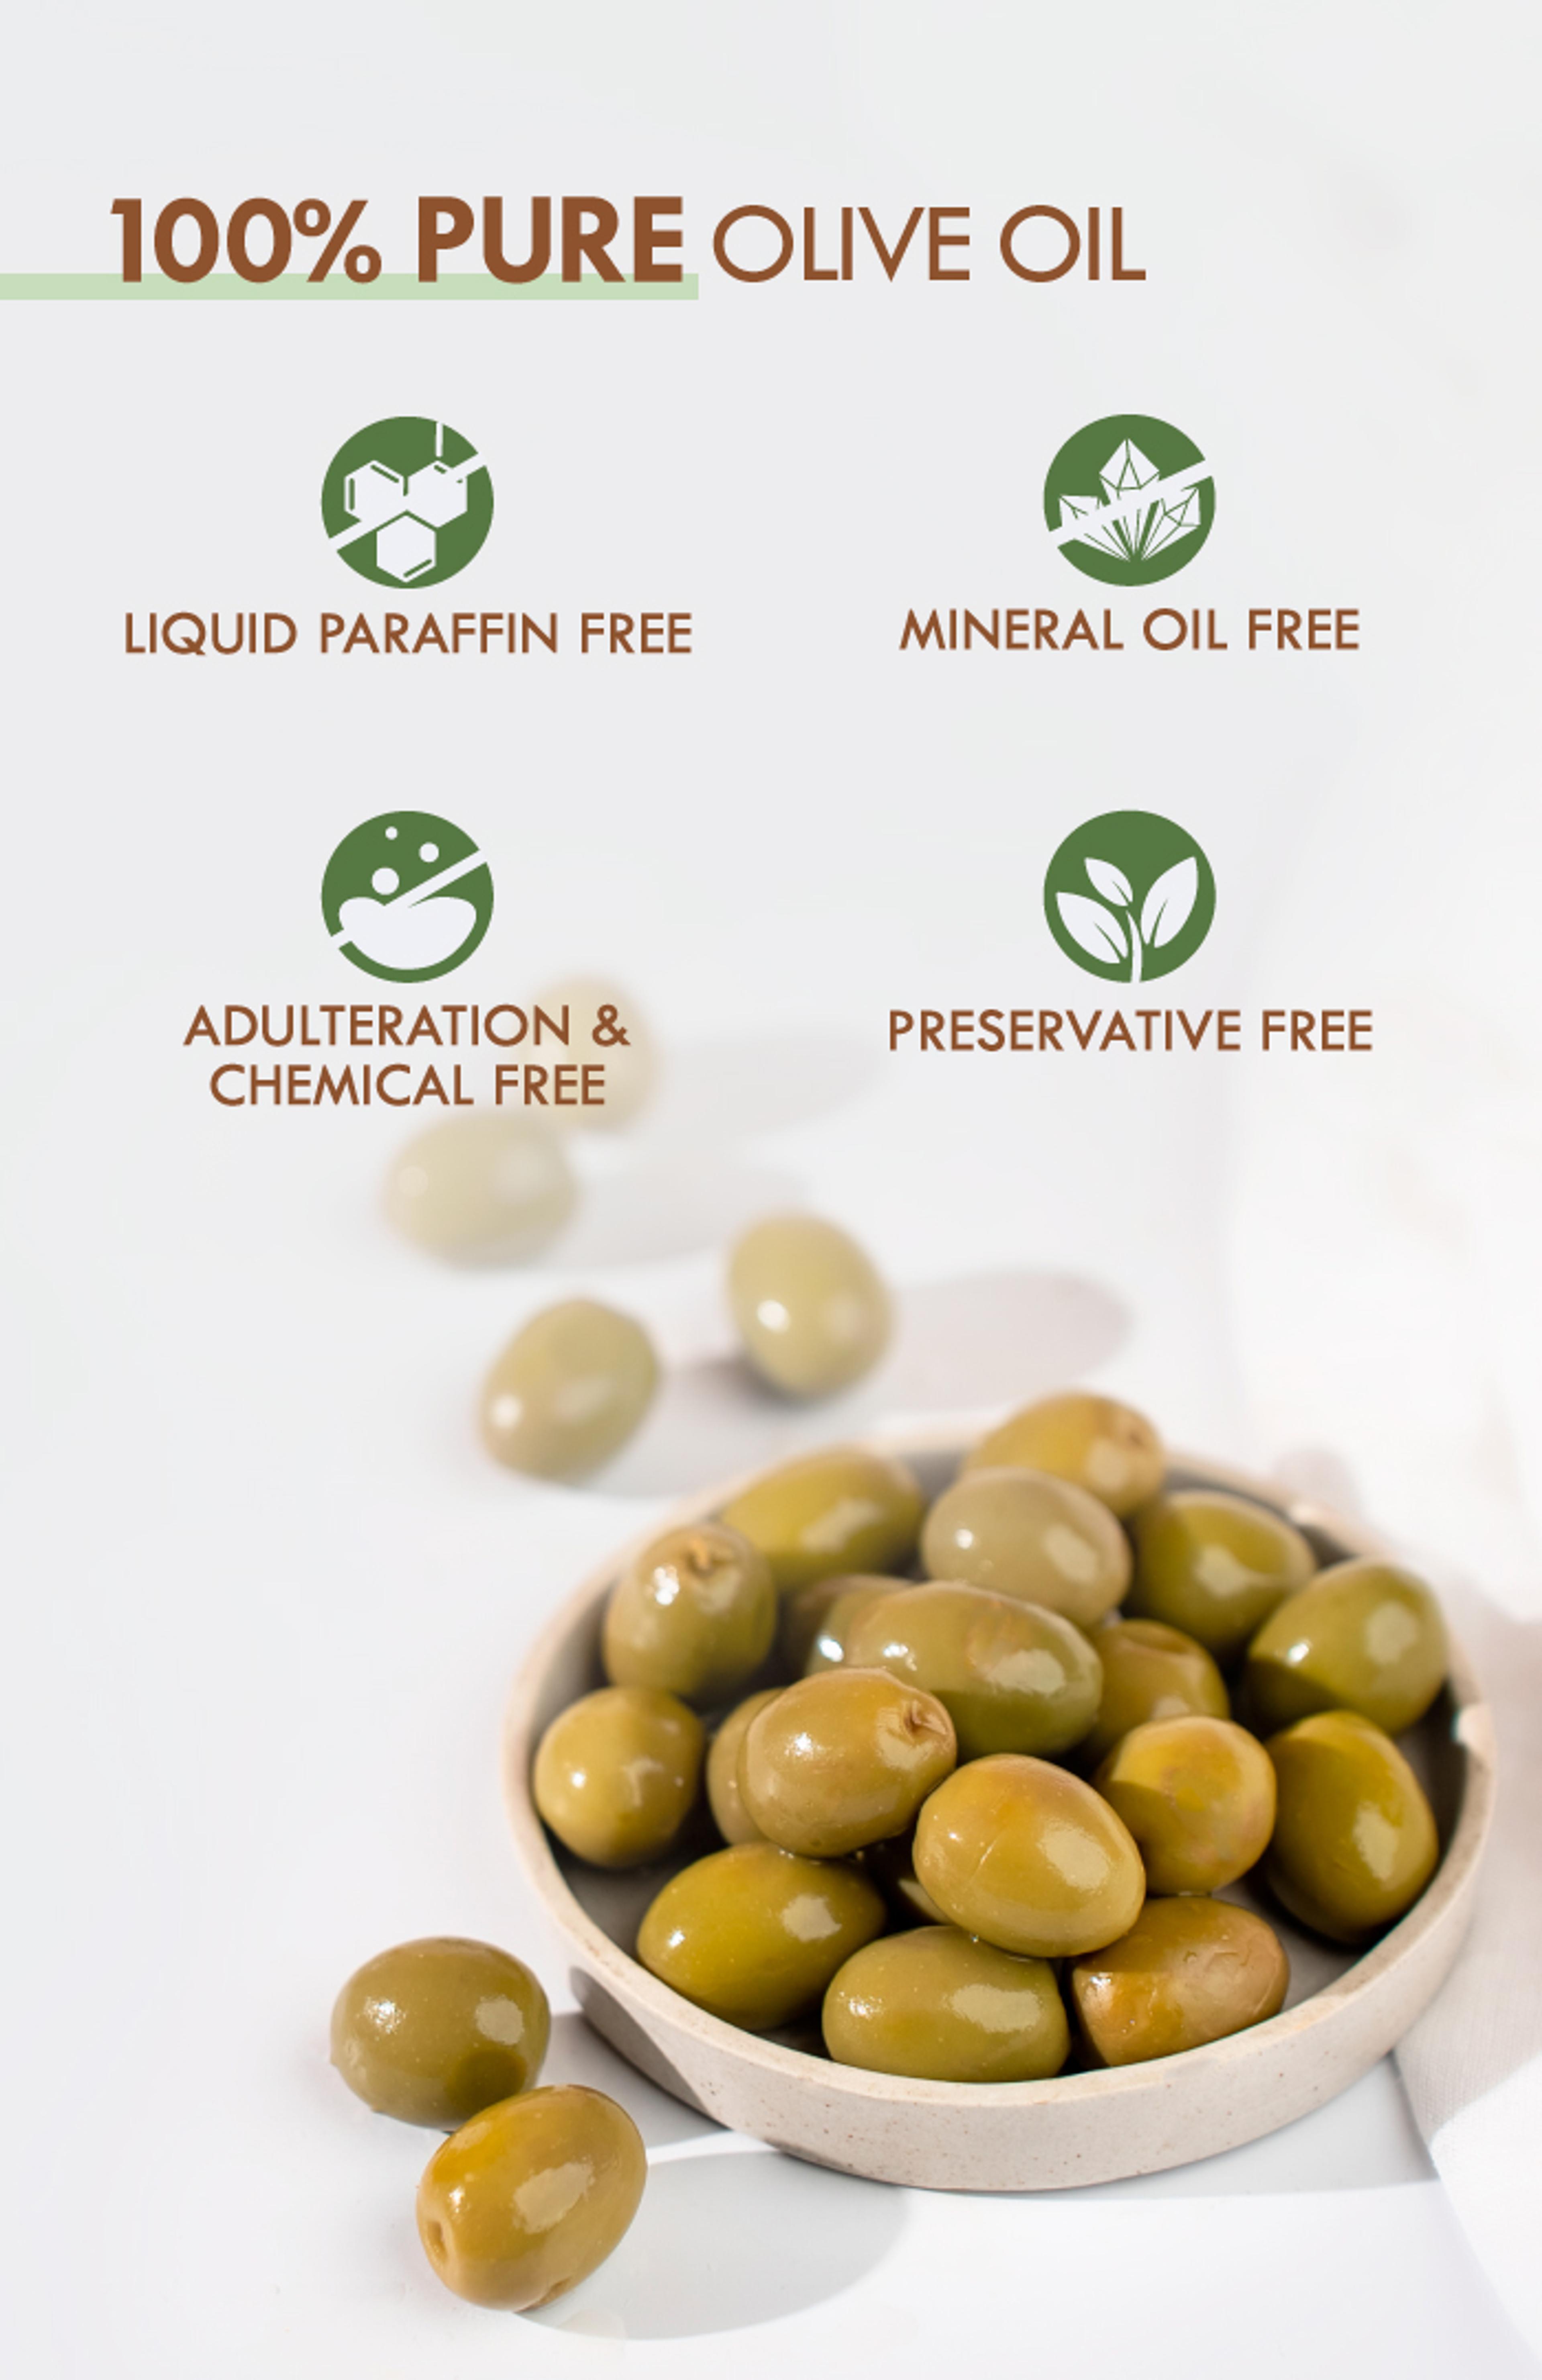 Olive-pure-oil-2